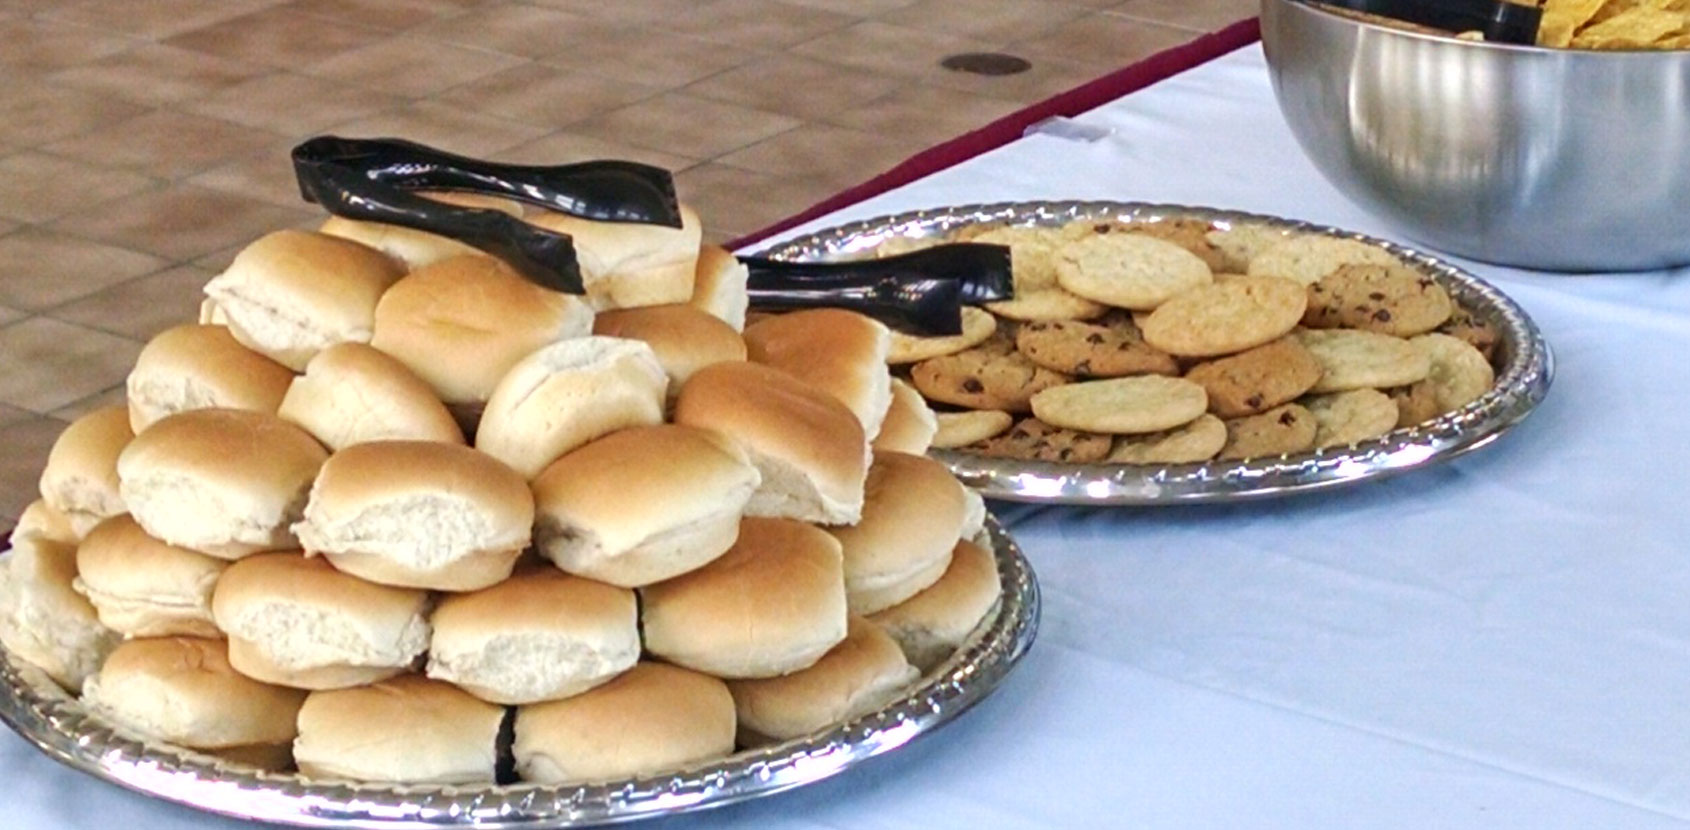 Assortment of dinner rolls, cookies and other delicious food